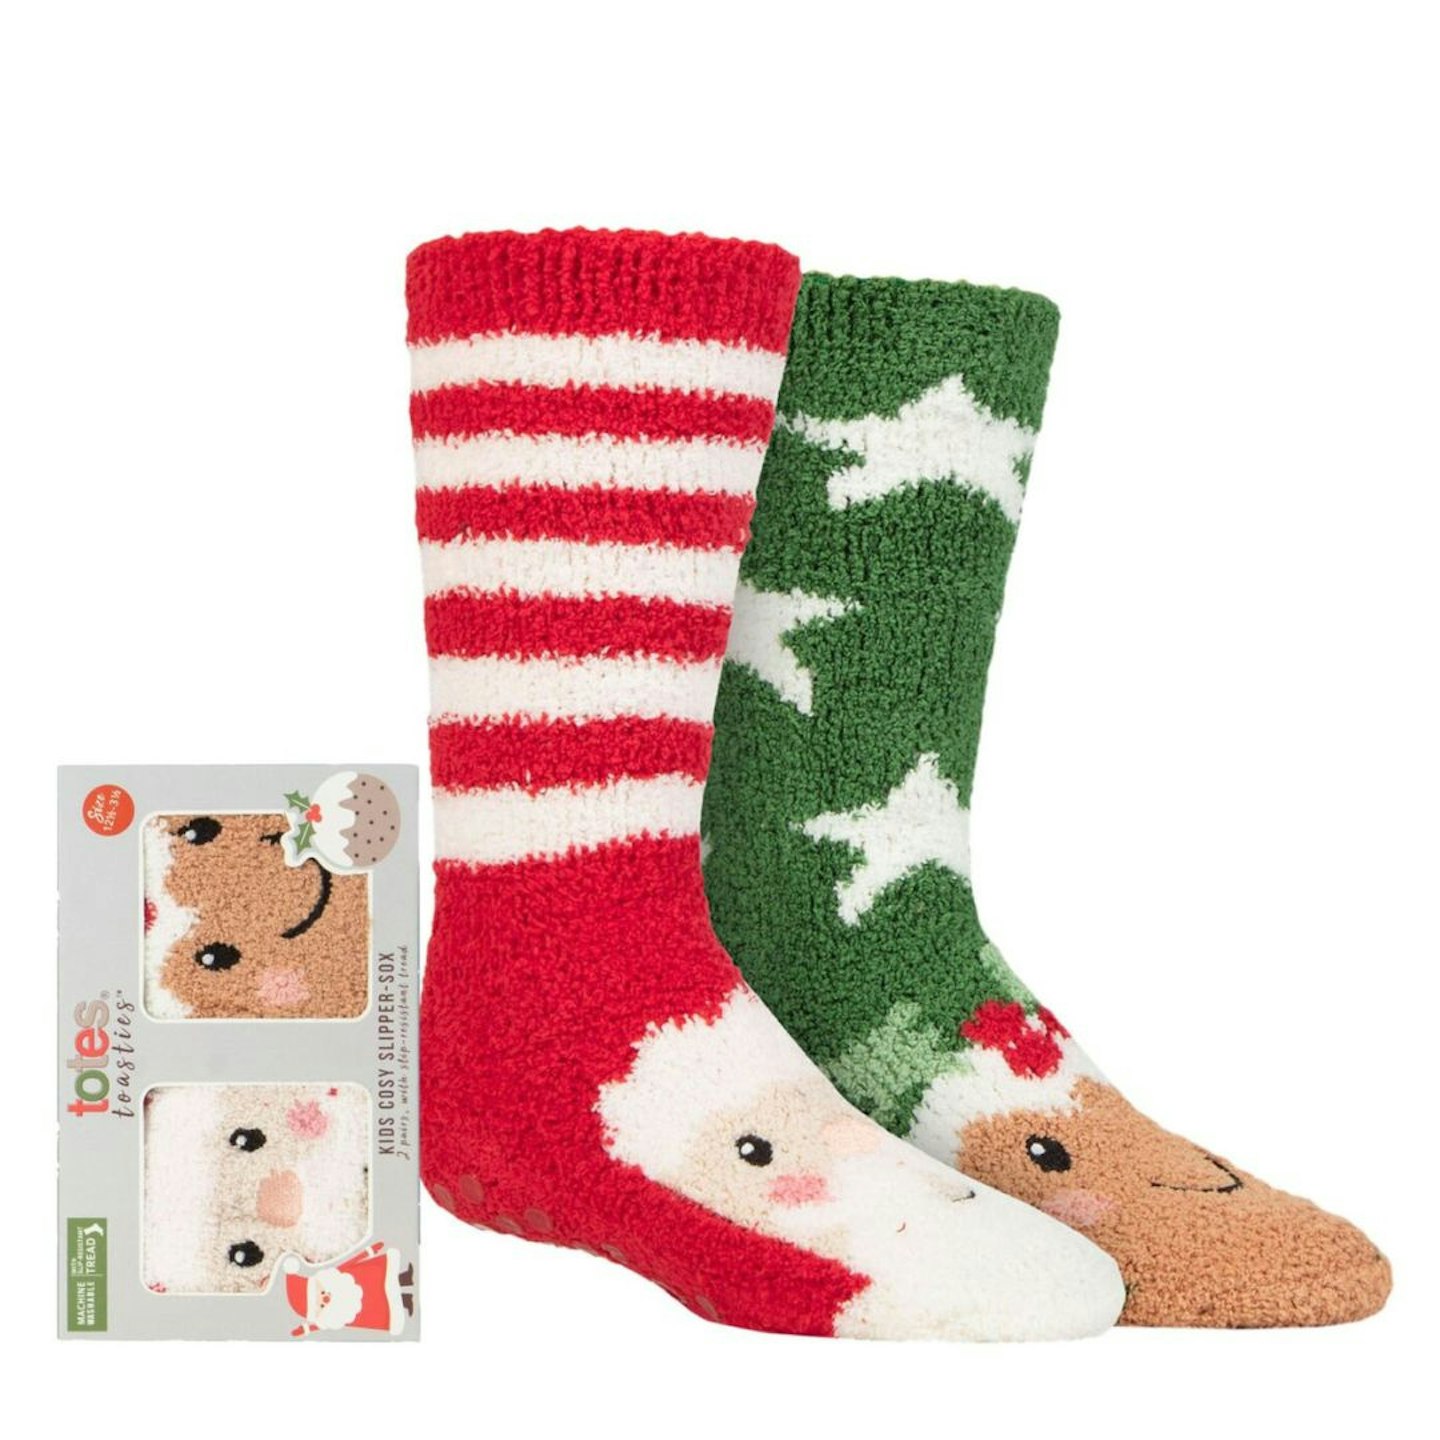 Best Christmas Gifts For Kids: BOYS AND GIRLS 2 PAIR TOTES CHUNKY CHRISTMAS NOVELTY SLIPPER SOCKS WITH POM POM DETAIL